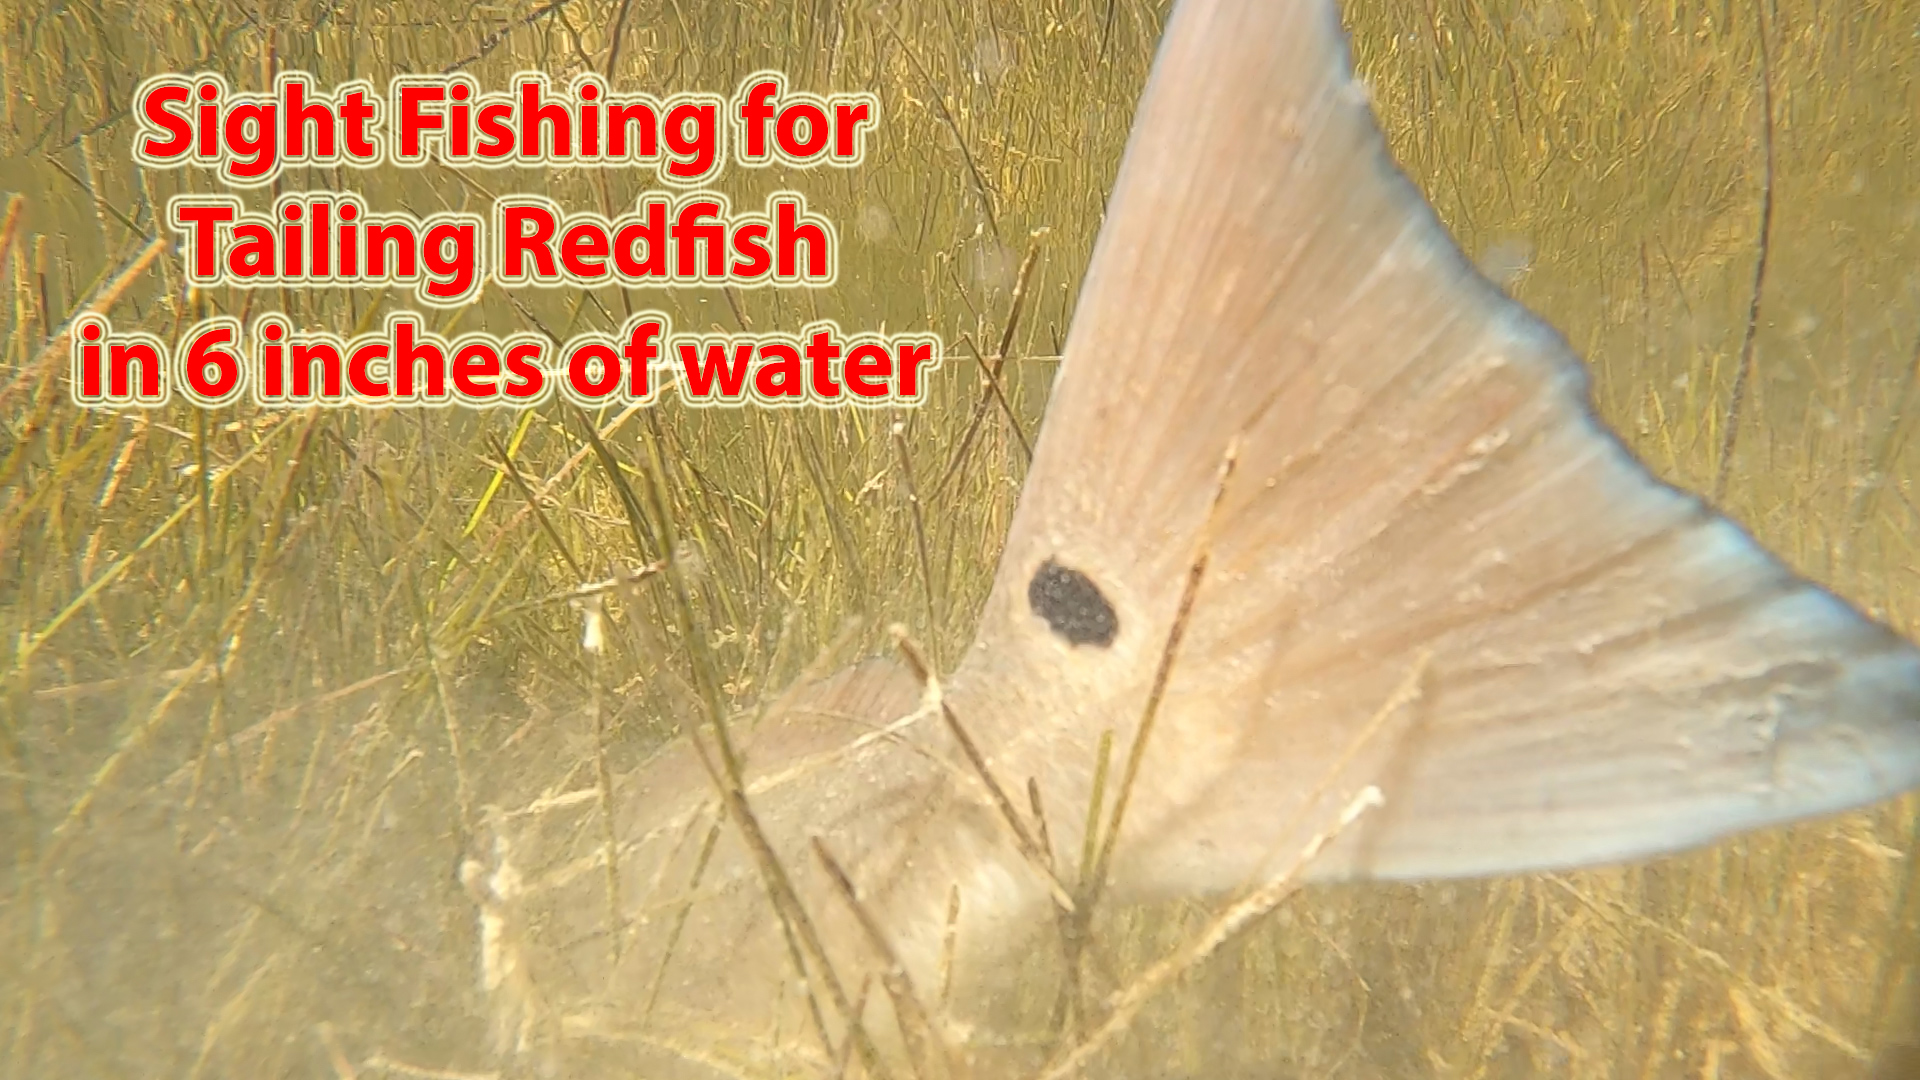 Awesome fishing in the skinny for tailing redfish!